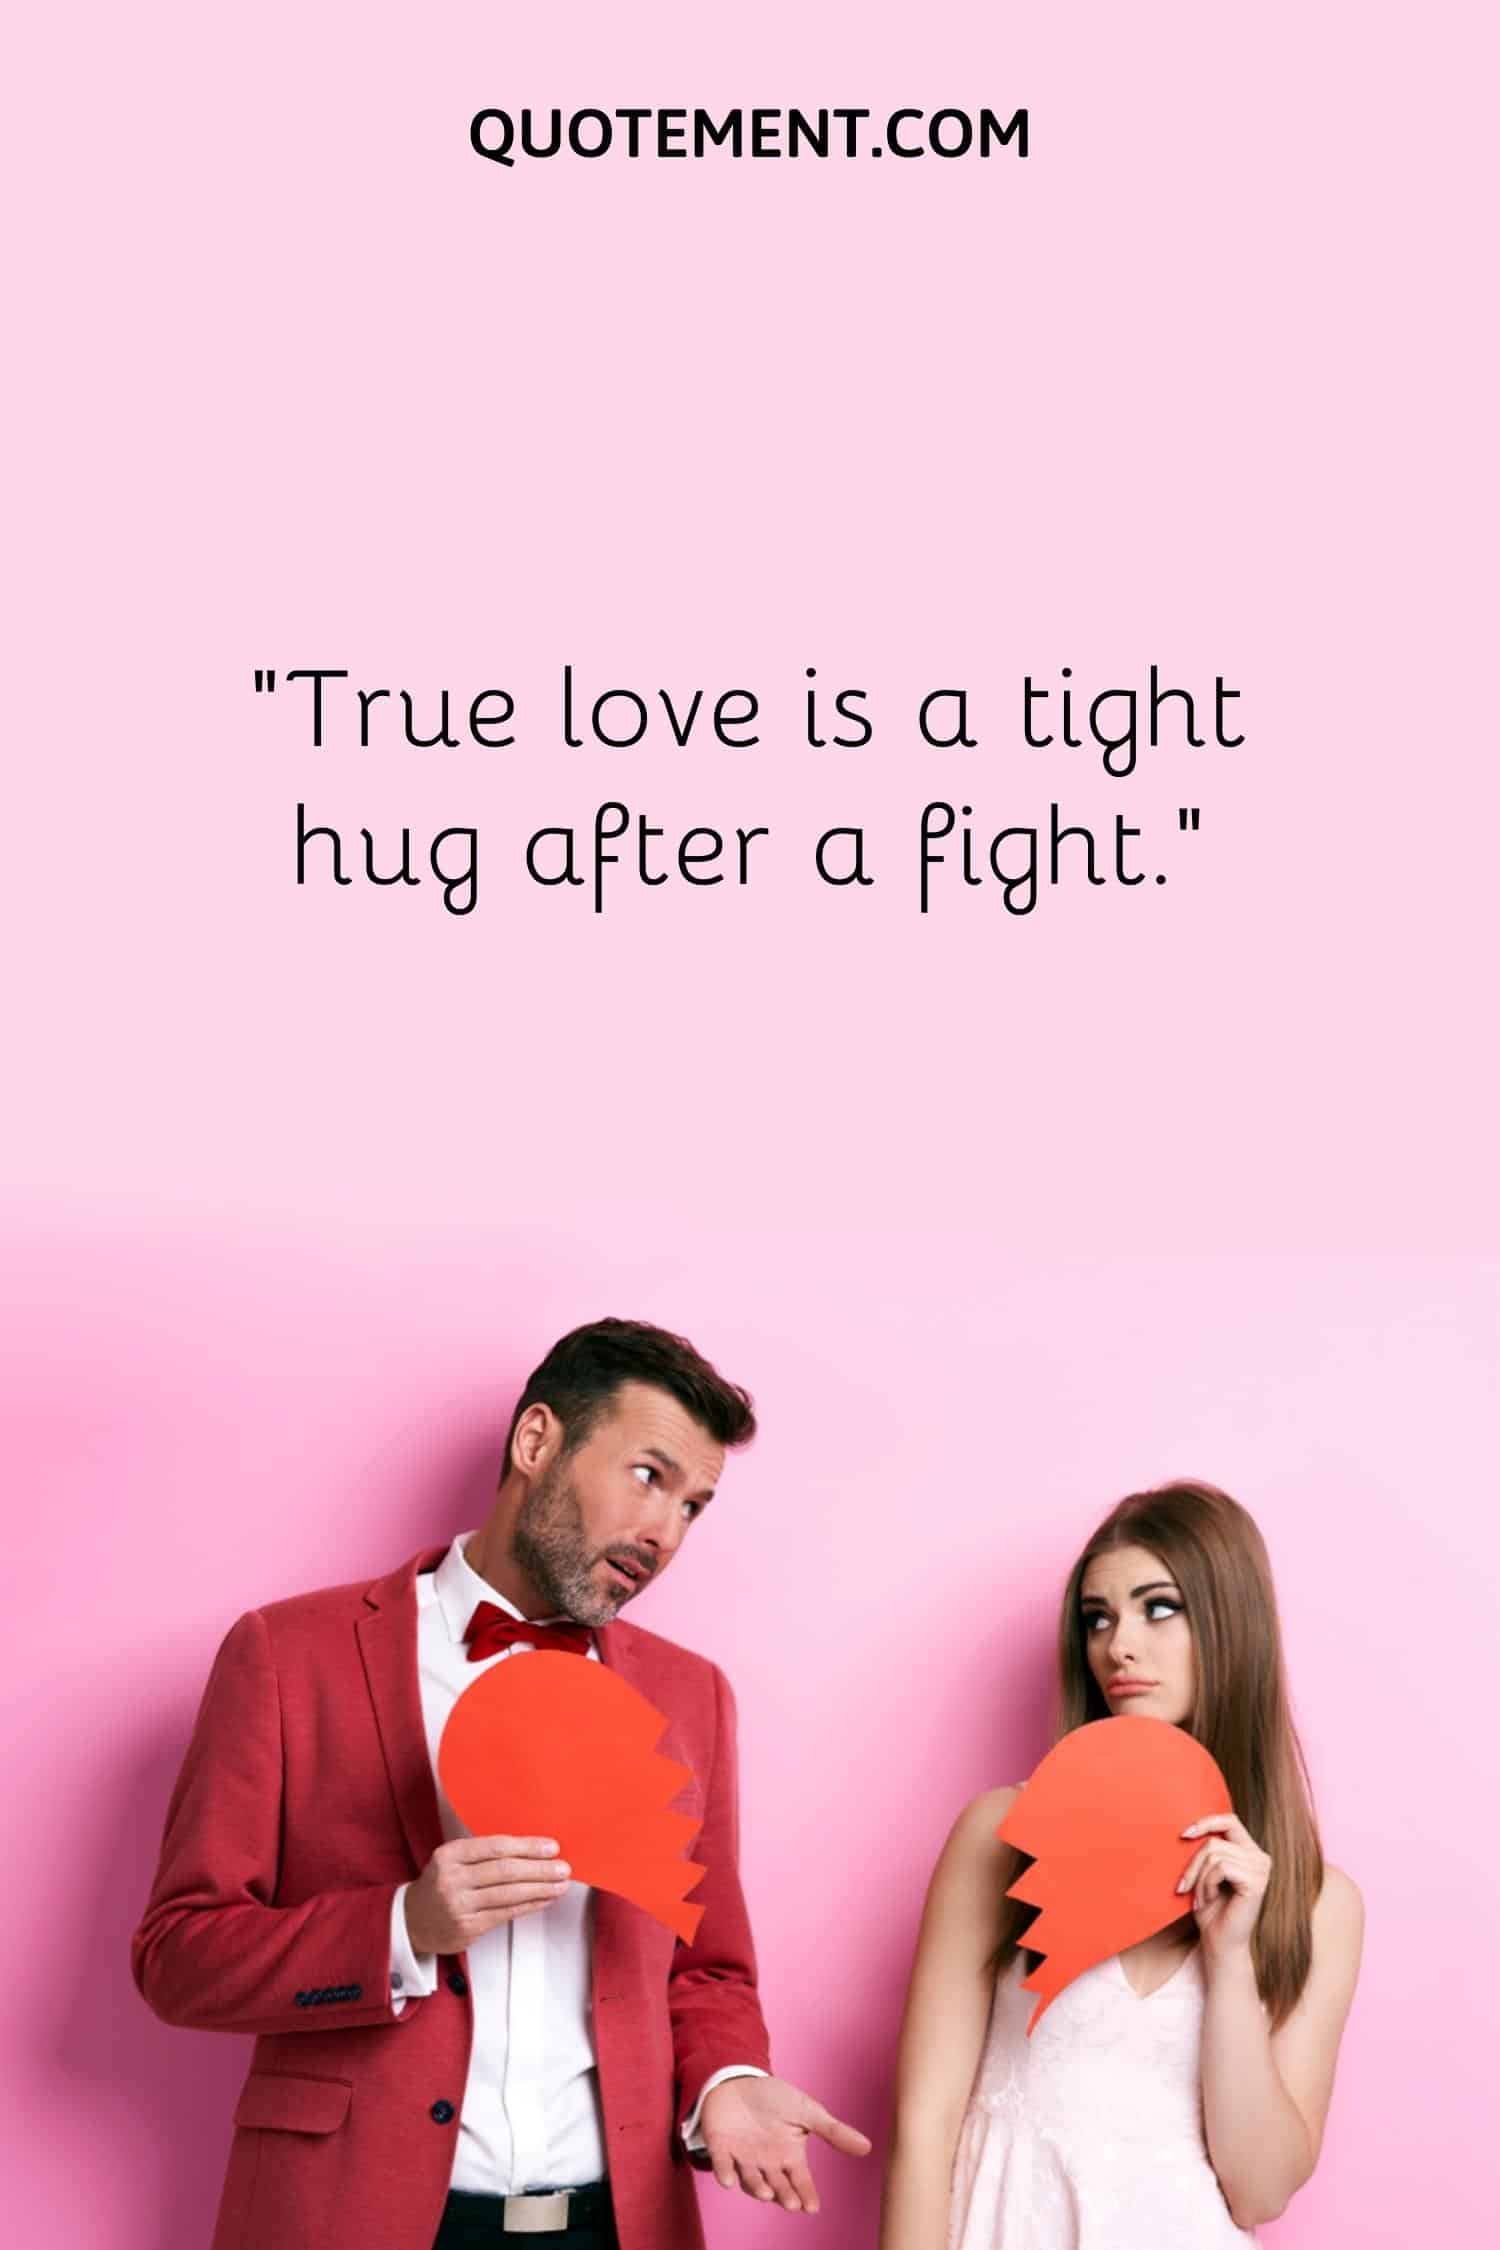 “True love is a tight hug after a fight.”